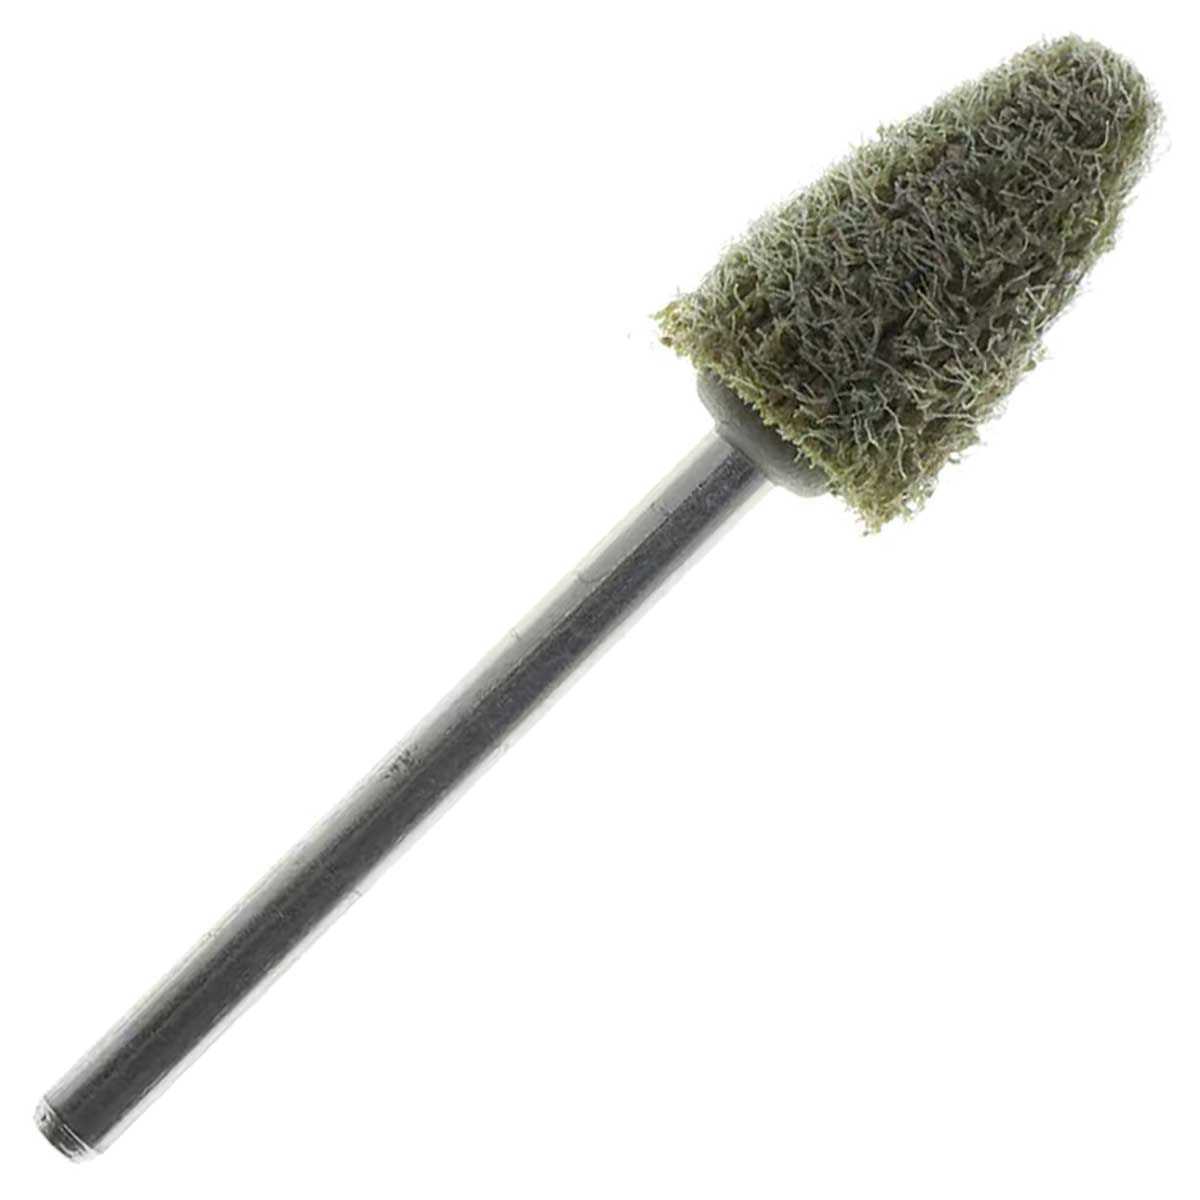 09.5mm - 3/8 inch Fine Flame Abrasive Buffing Point - 1/8 inch shank -  USA